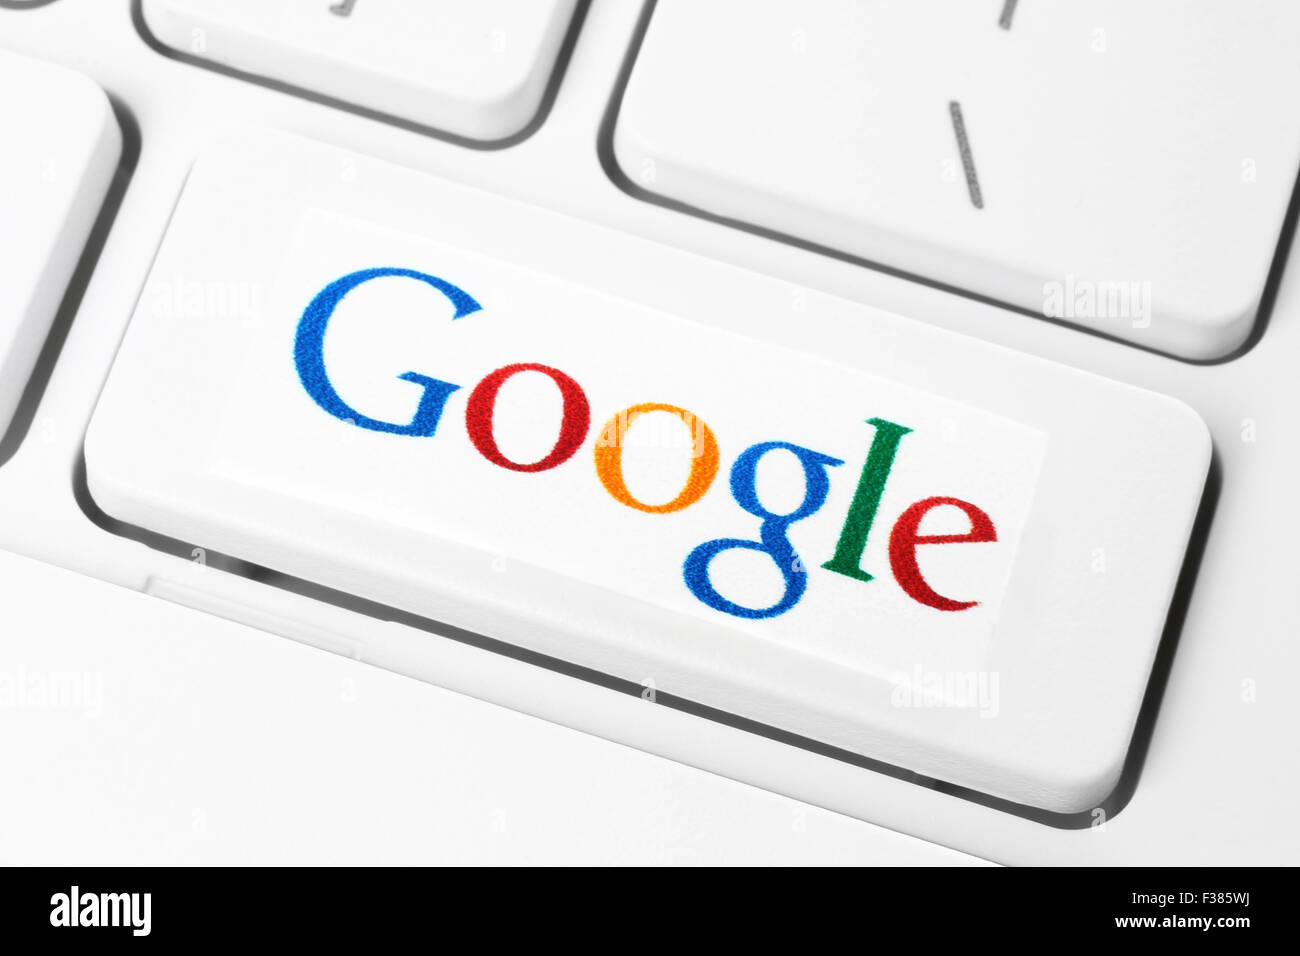 KIEV, UKRAINE - JANUARY 10, 2015: Keyboard with Google logotype, printed on paper and placed on button. Stock Photo